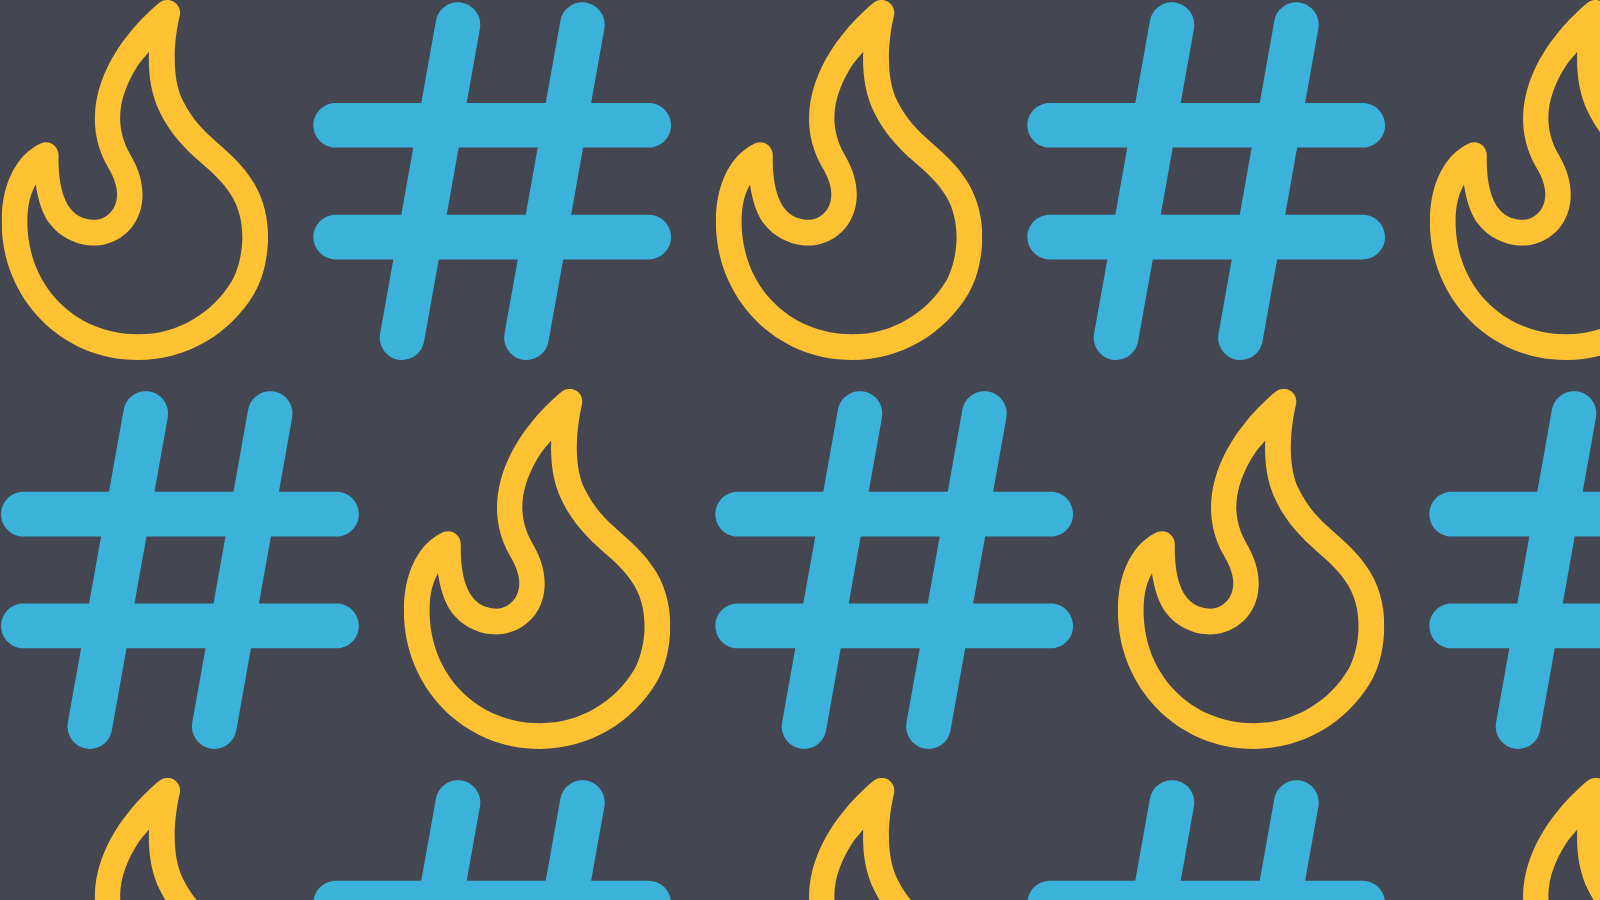 A fire icon and a hashtag in an alternating pattern